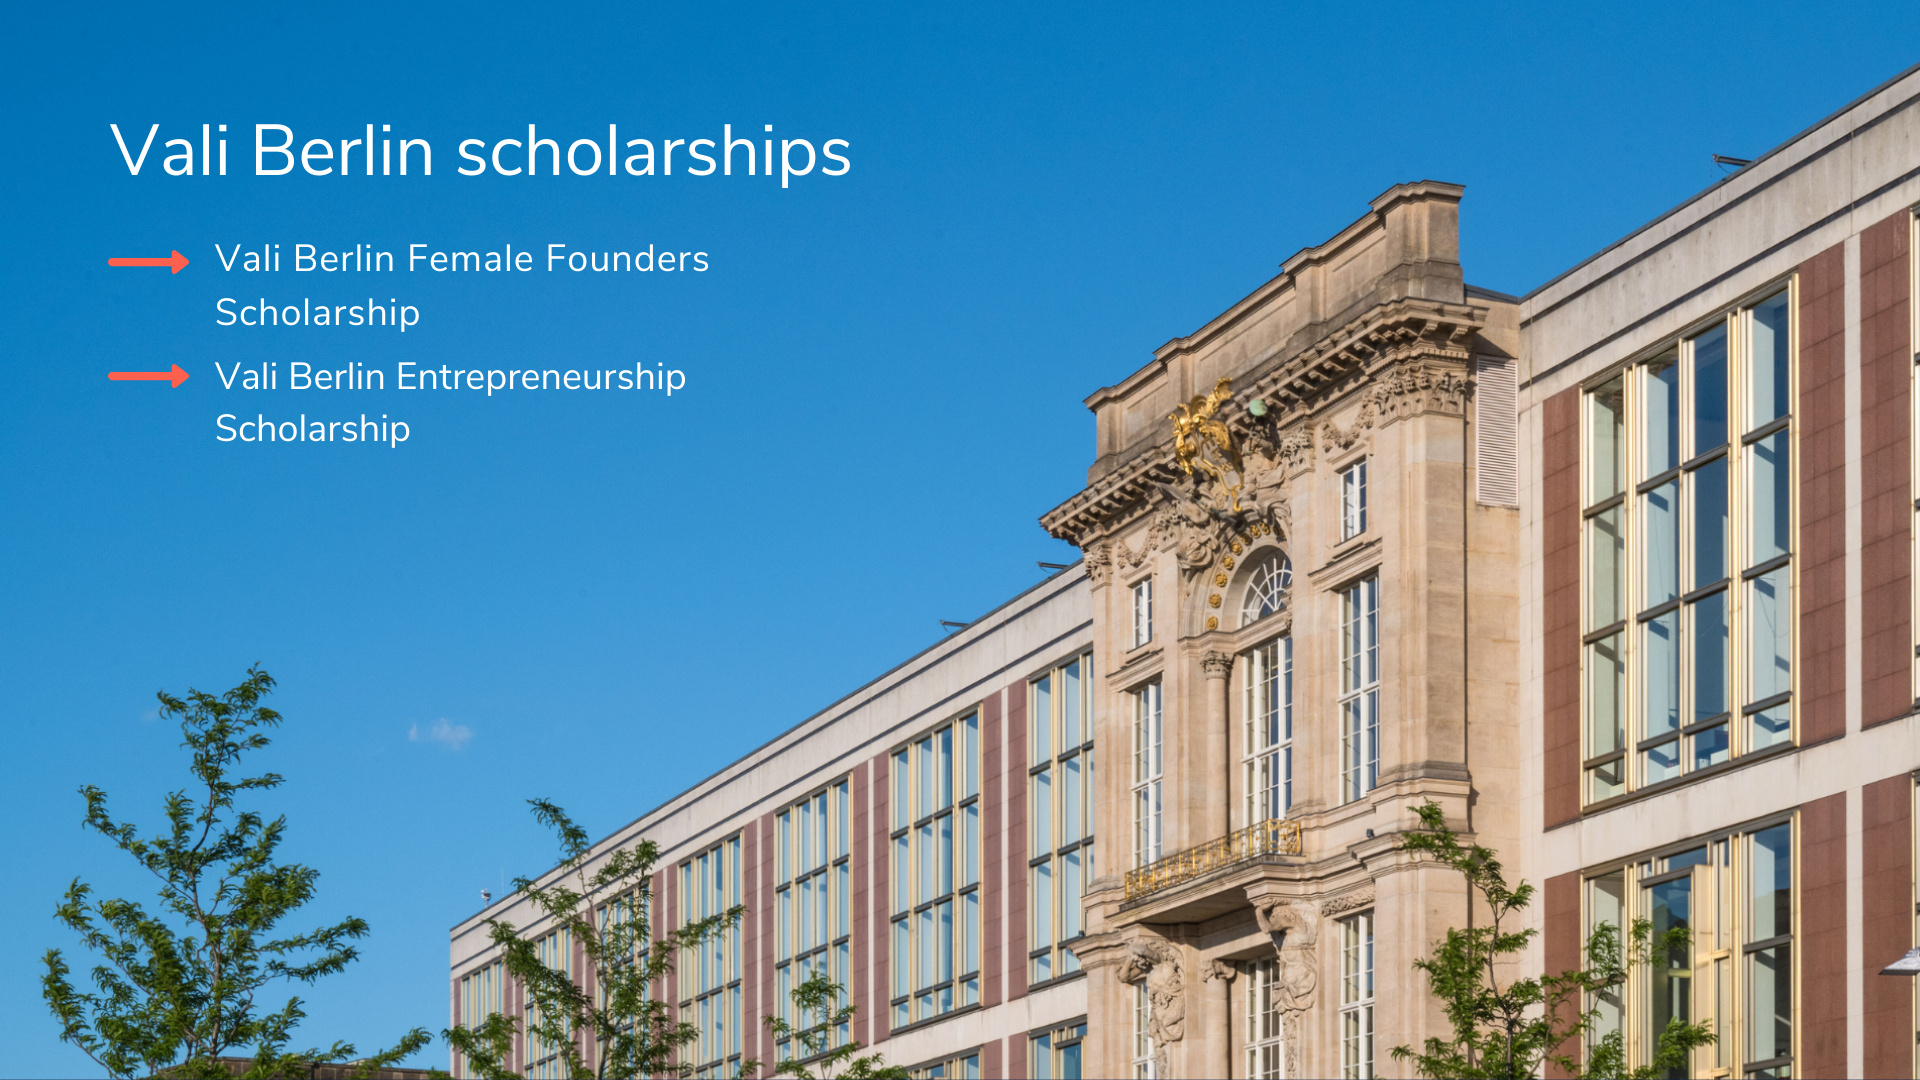 Against the backdrop of the ESMT front building and clear blue sky, the names of two Vali scholarships are shown.